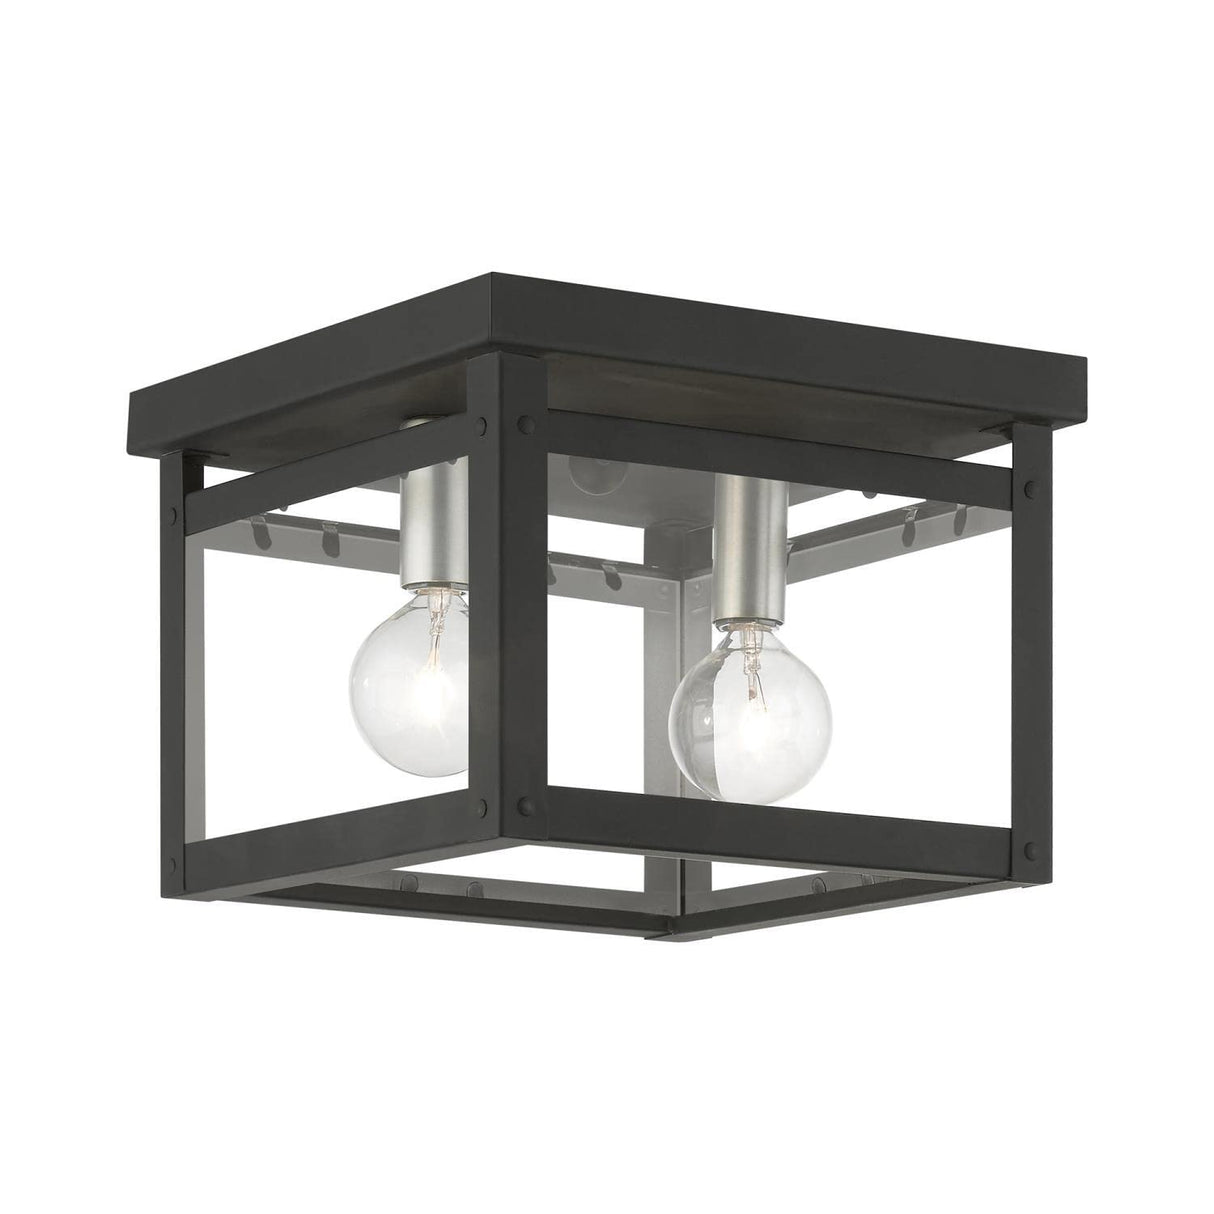 Milford 2 Light Flush Mount in Black with Brushed Nickel Candles (4031-04)